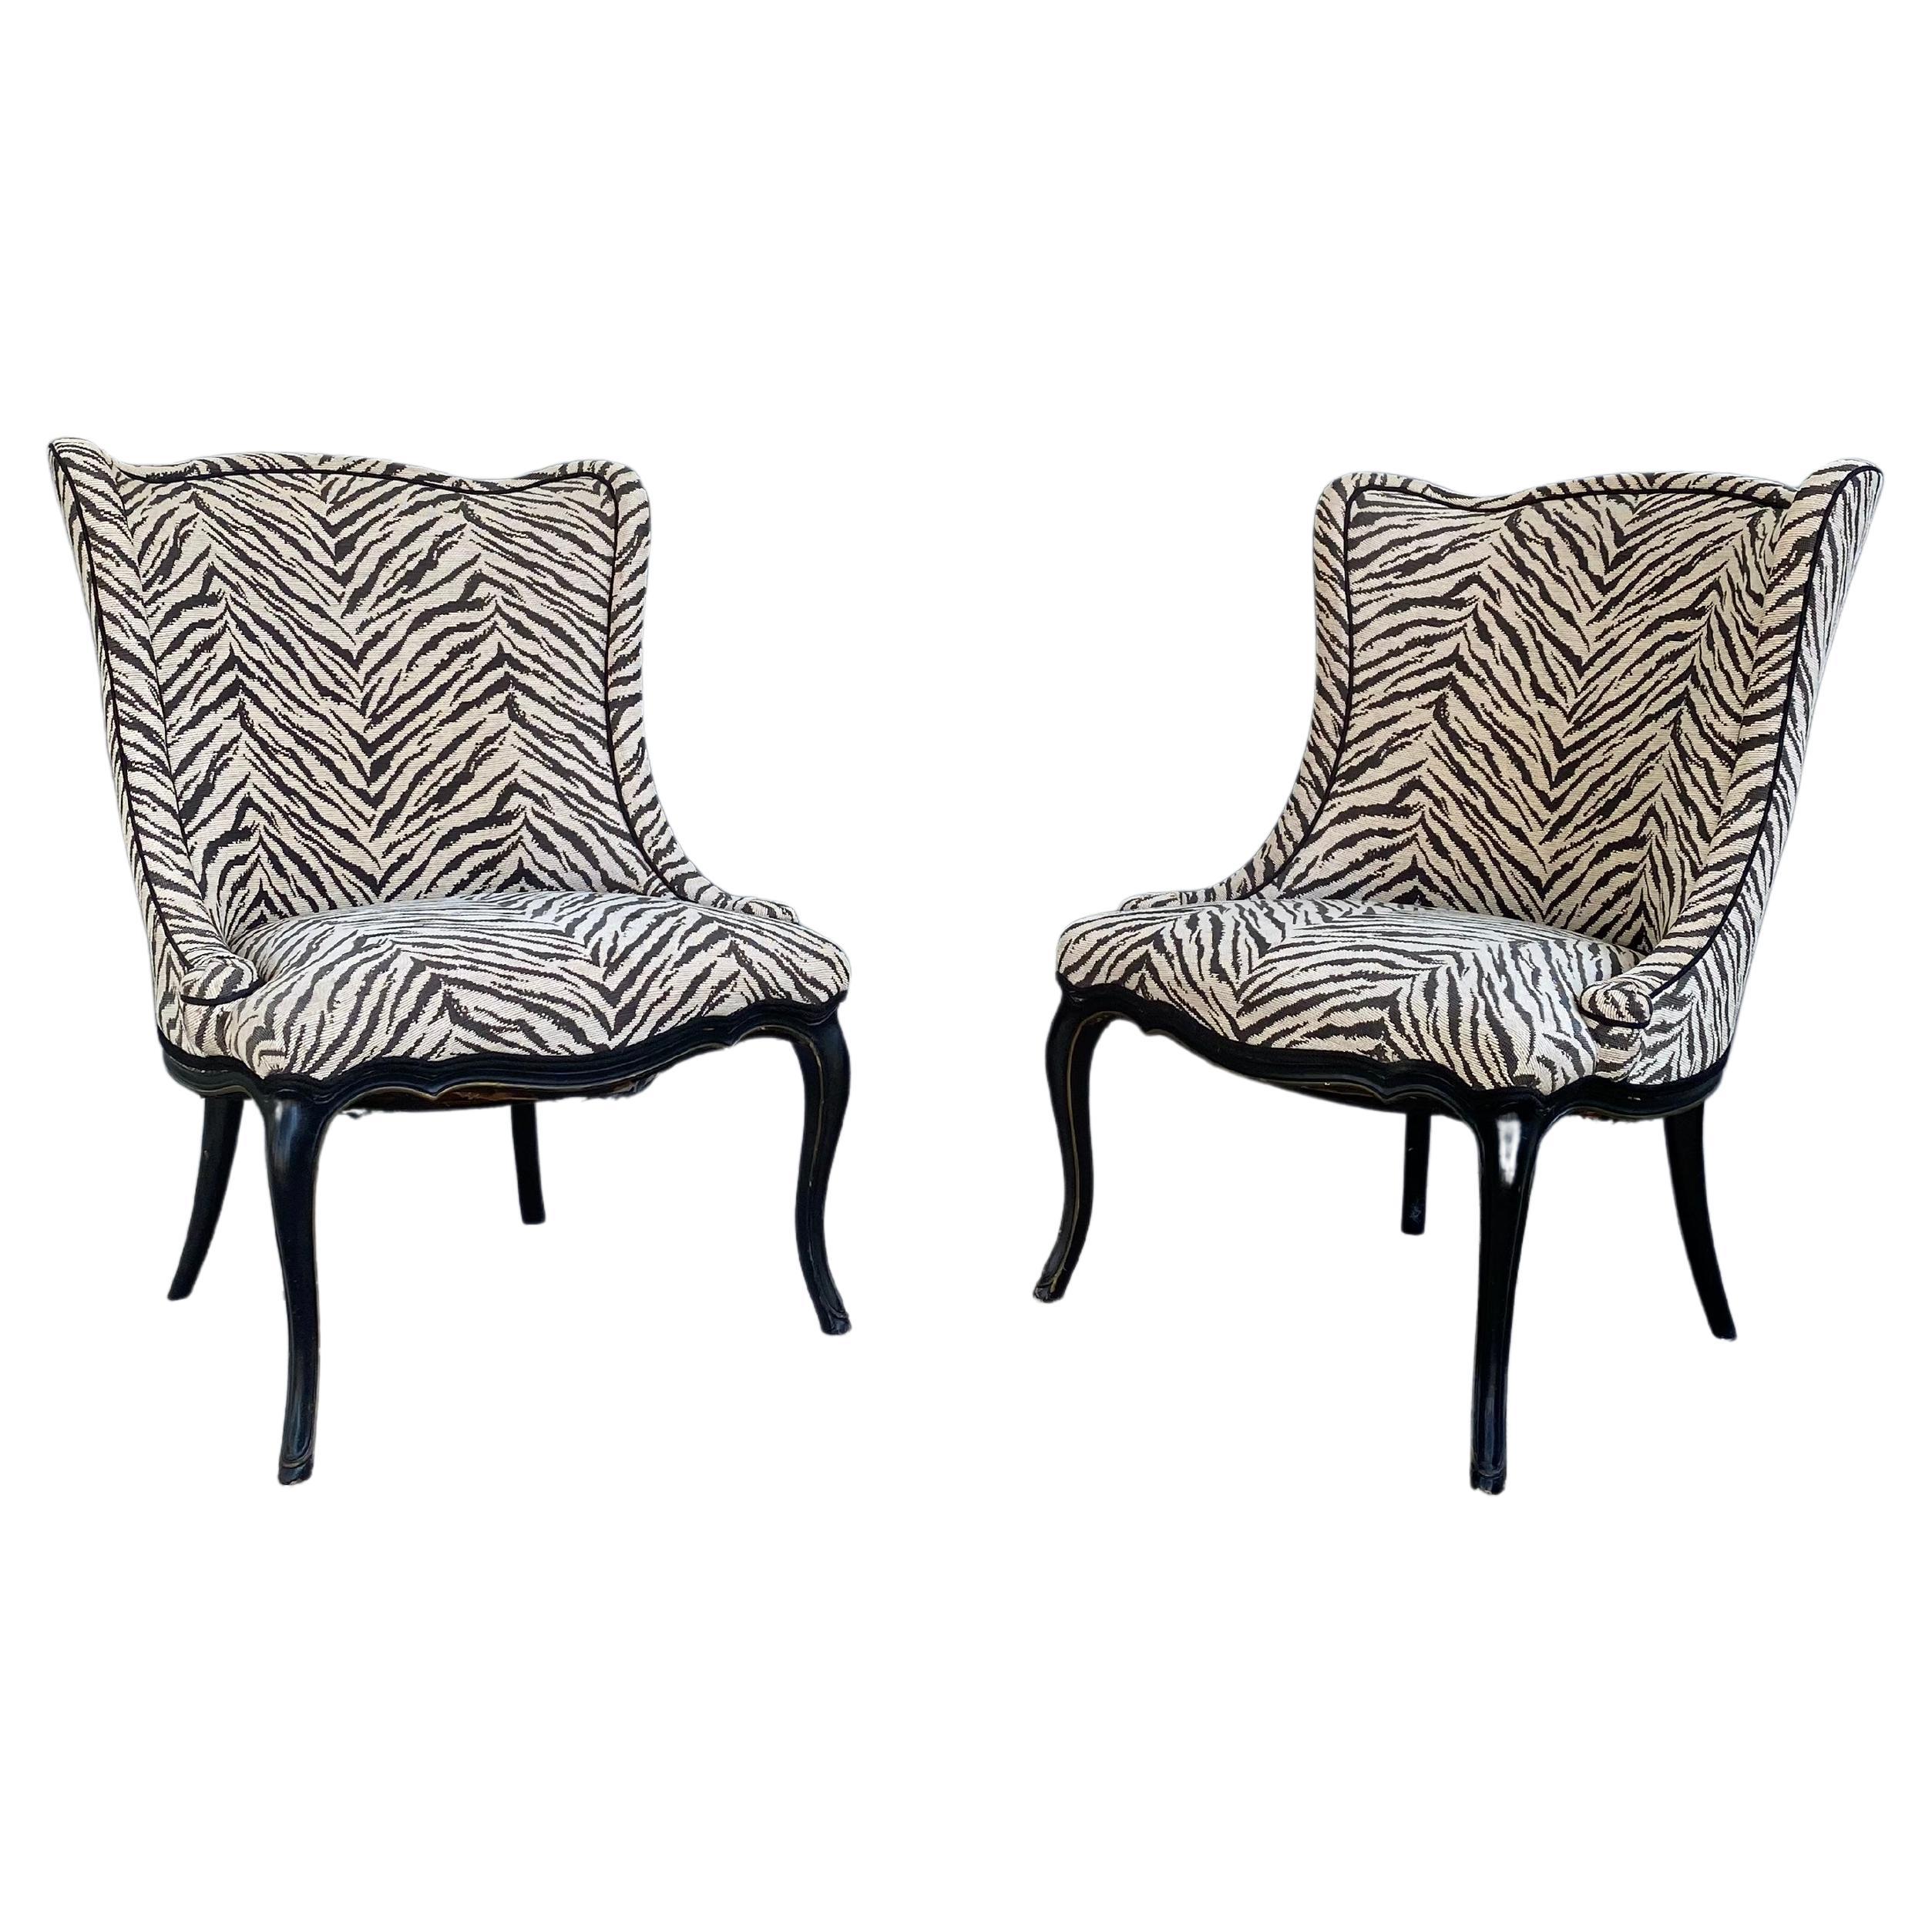 Queen Anne Wing Back Slipper Style Scalamandre Zebra Chairs, Set of 2